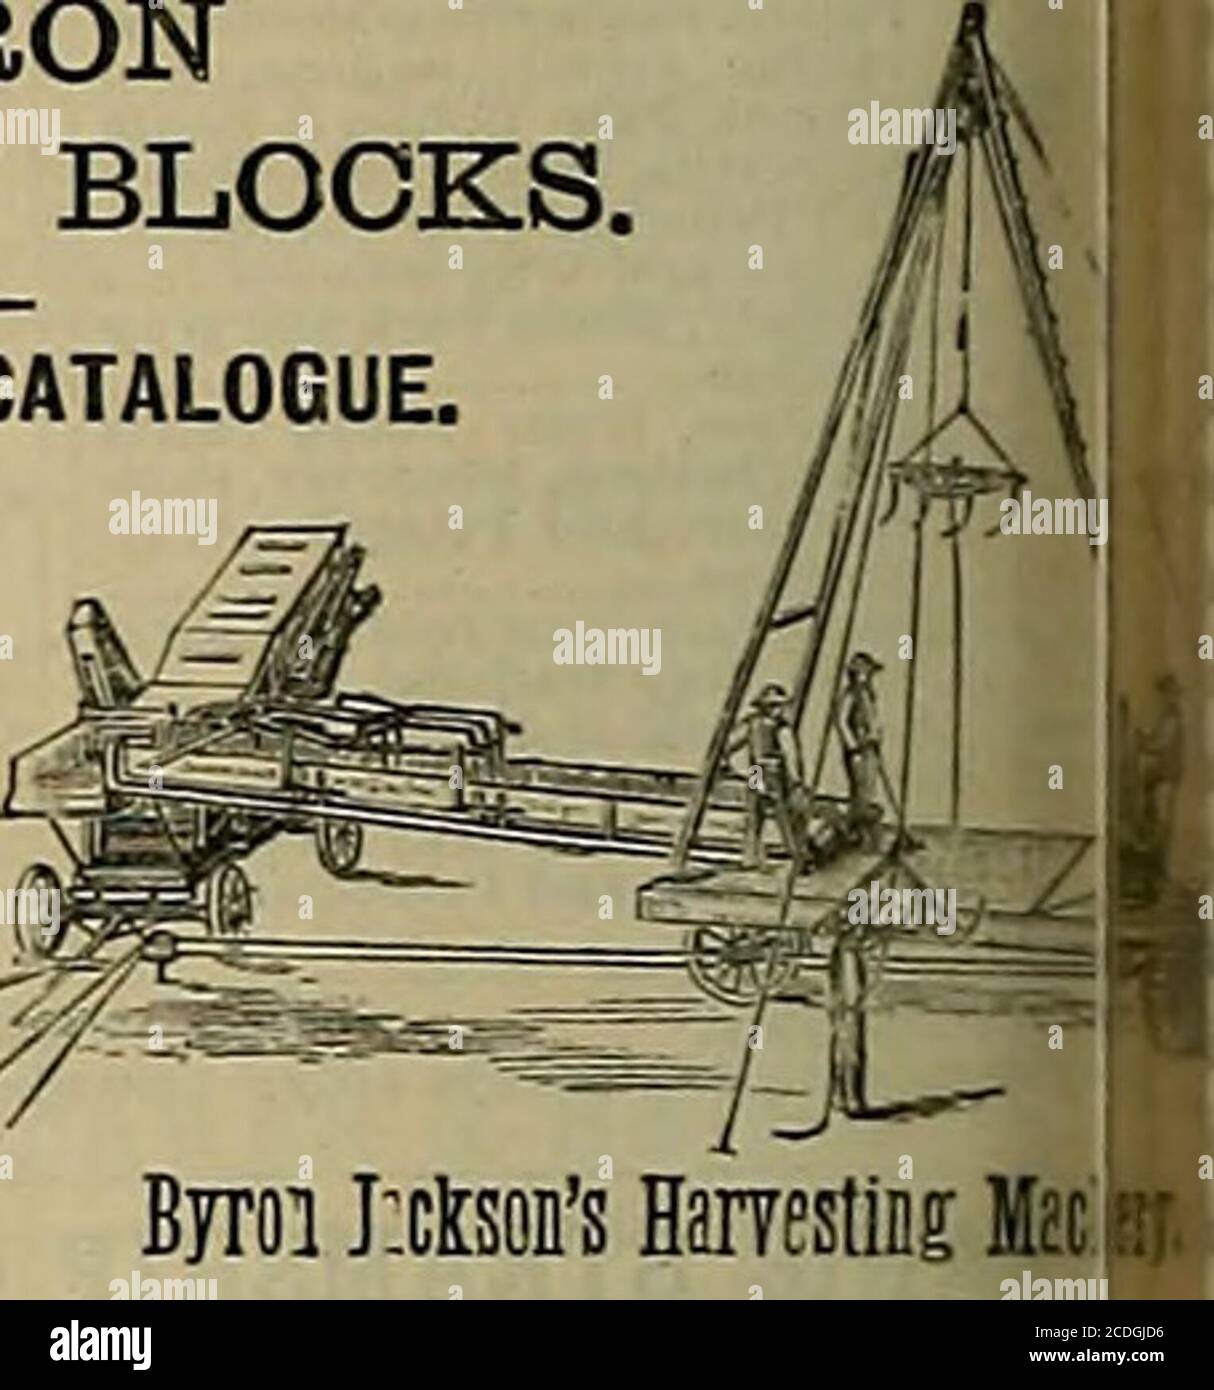 Breeder and sportsman . Jactoons Automatic Expansion Self-Oiling Engines,  ill Iti 3vi.A.:NTT:F,.A.oTTjm:P Jacksons Self Feedl FOR THRESHING MACHINES!SIDE  ELEVATORS, SPREADERS, DERRICKS, PORK lf]R Patent Light Weight Horse Fil  PATENT IRON PULLEY